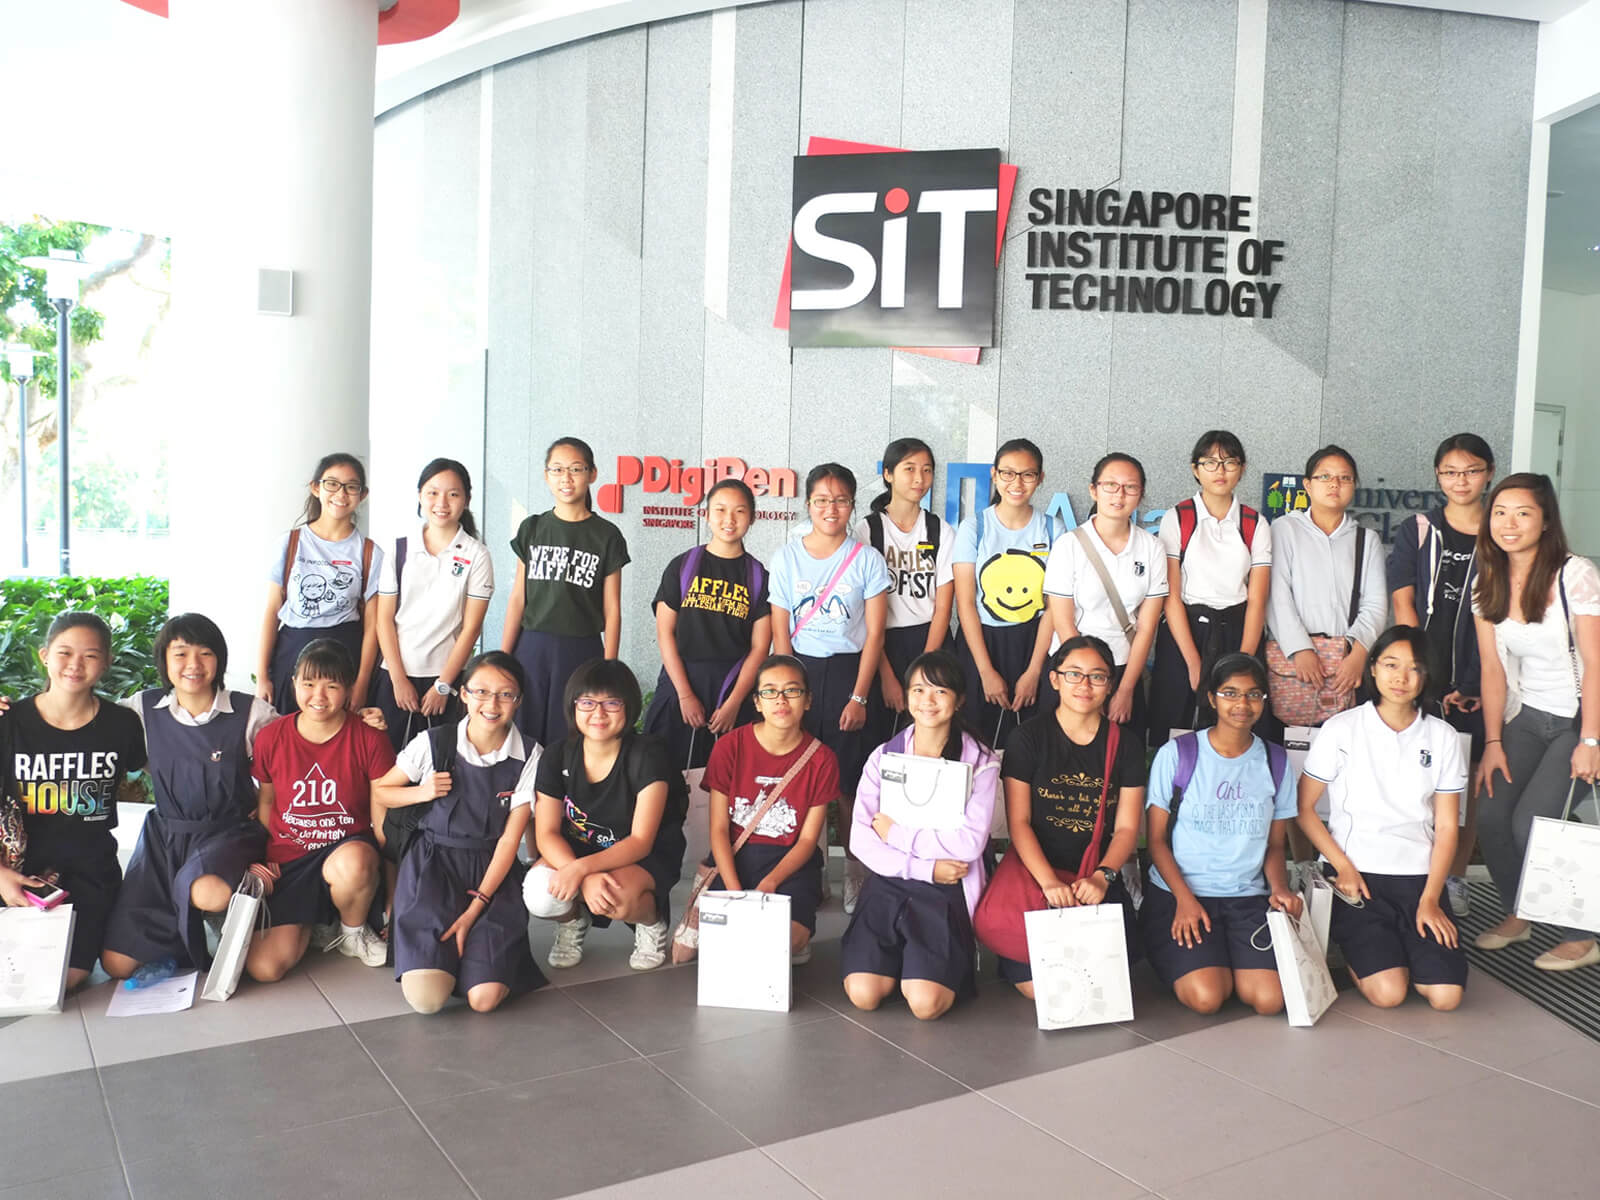 A group of schoolchildren pose for a picture in front of a building displaying the Singapore Institute of Technology logo